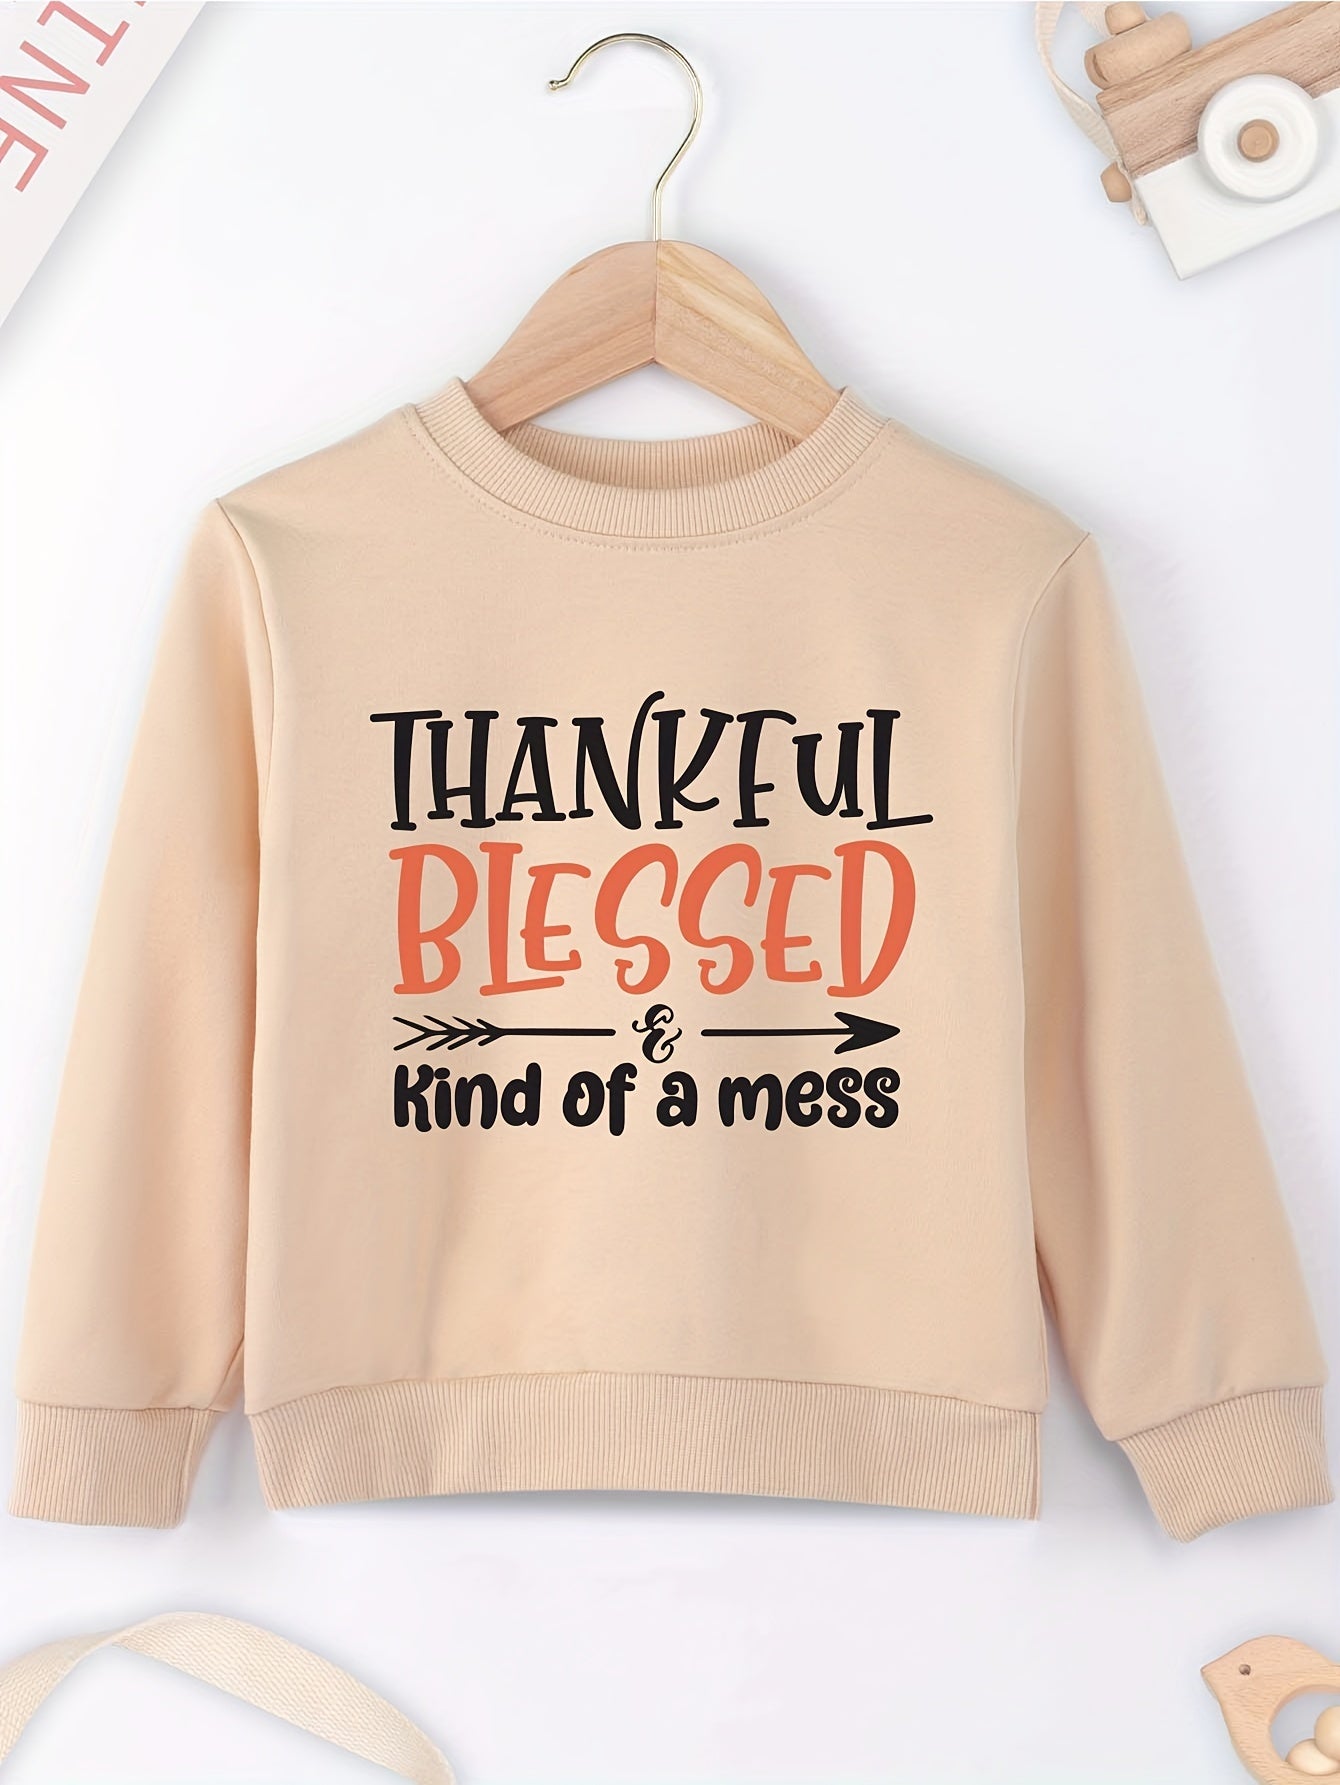 Thankful Blessed & Kind Of A Mess (thanksgiving themed) Youth Christian Pullover Sweatshirt claimedbygoddesigns